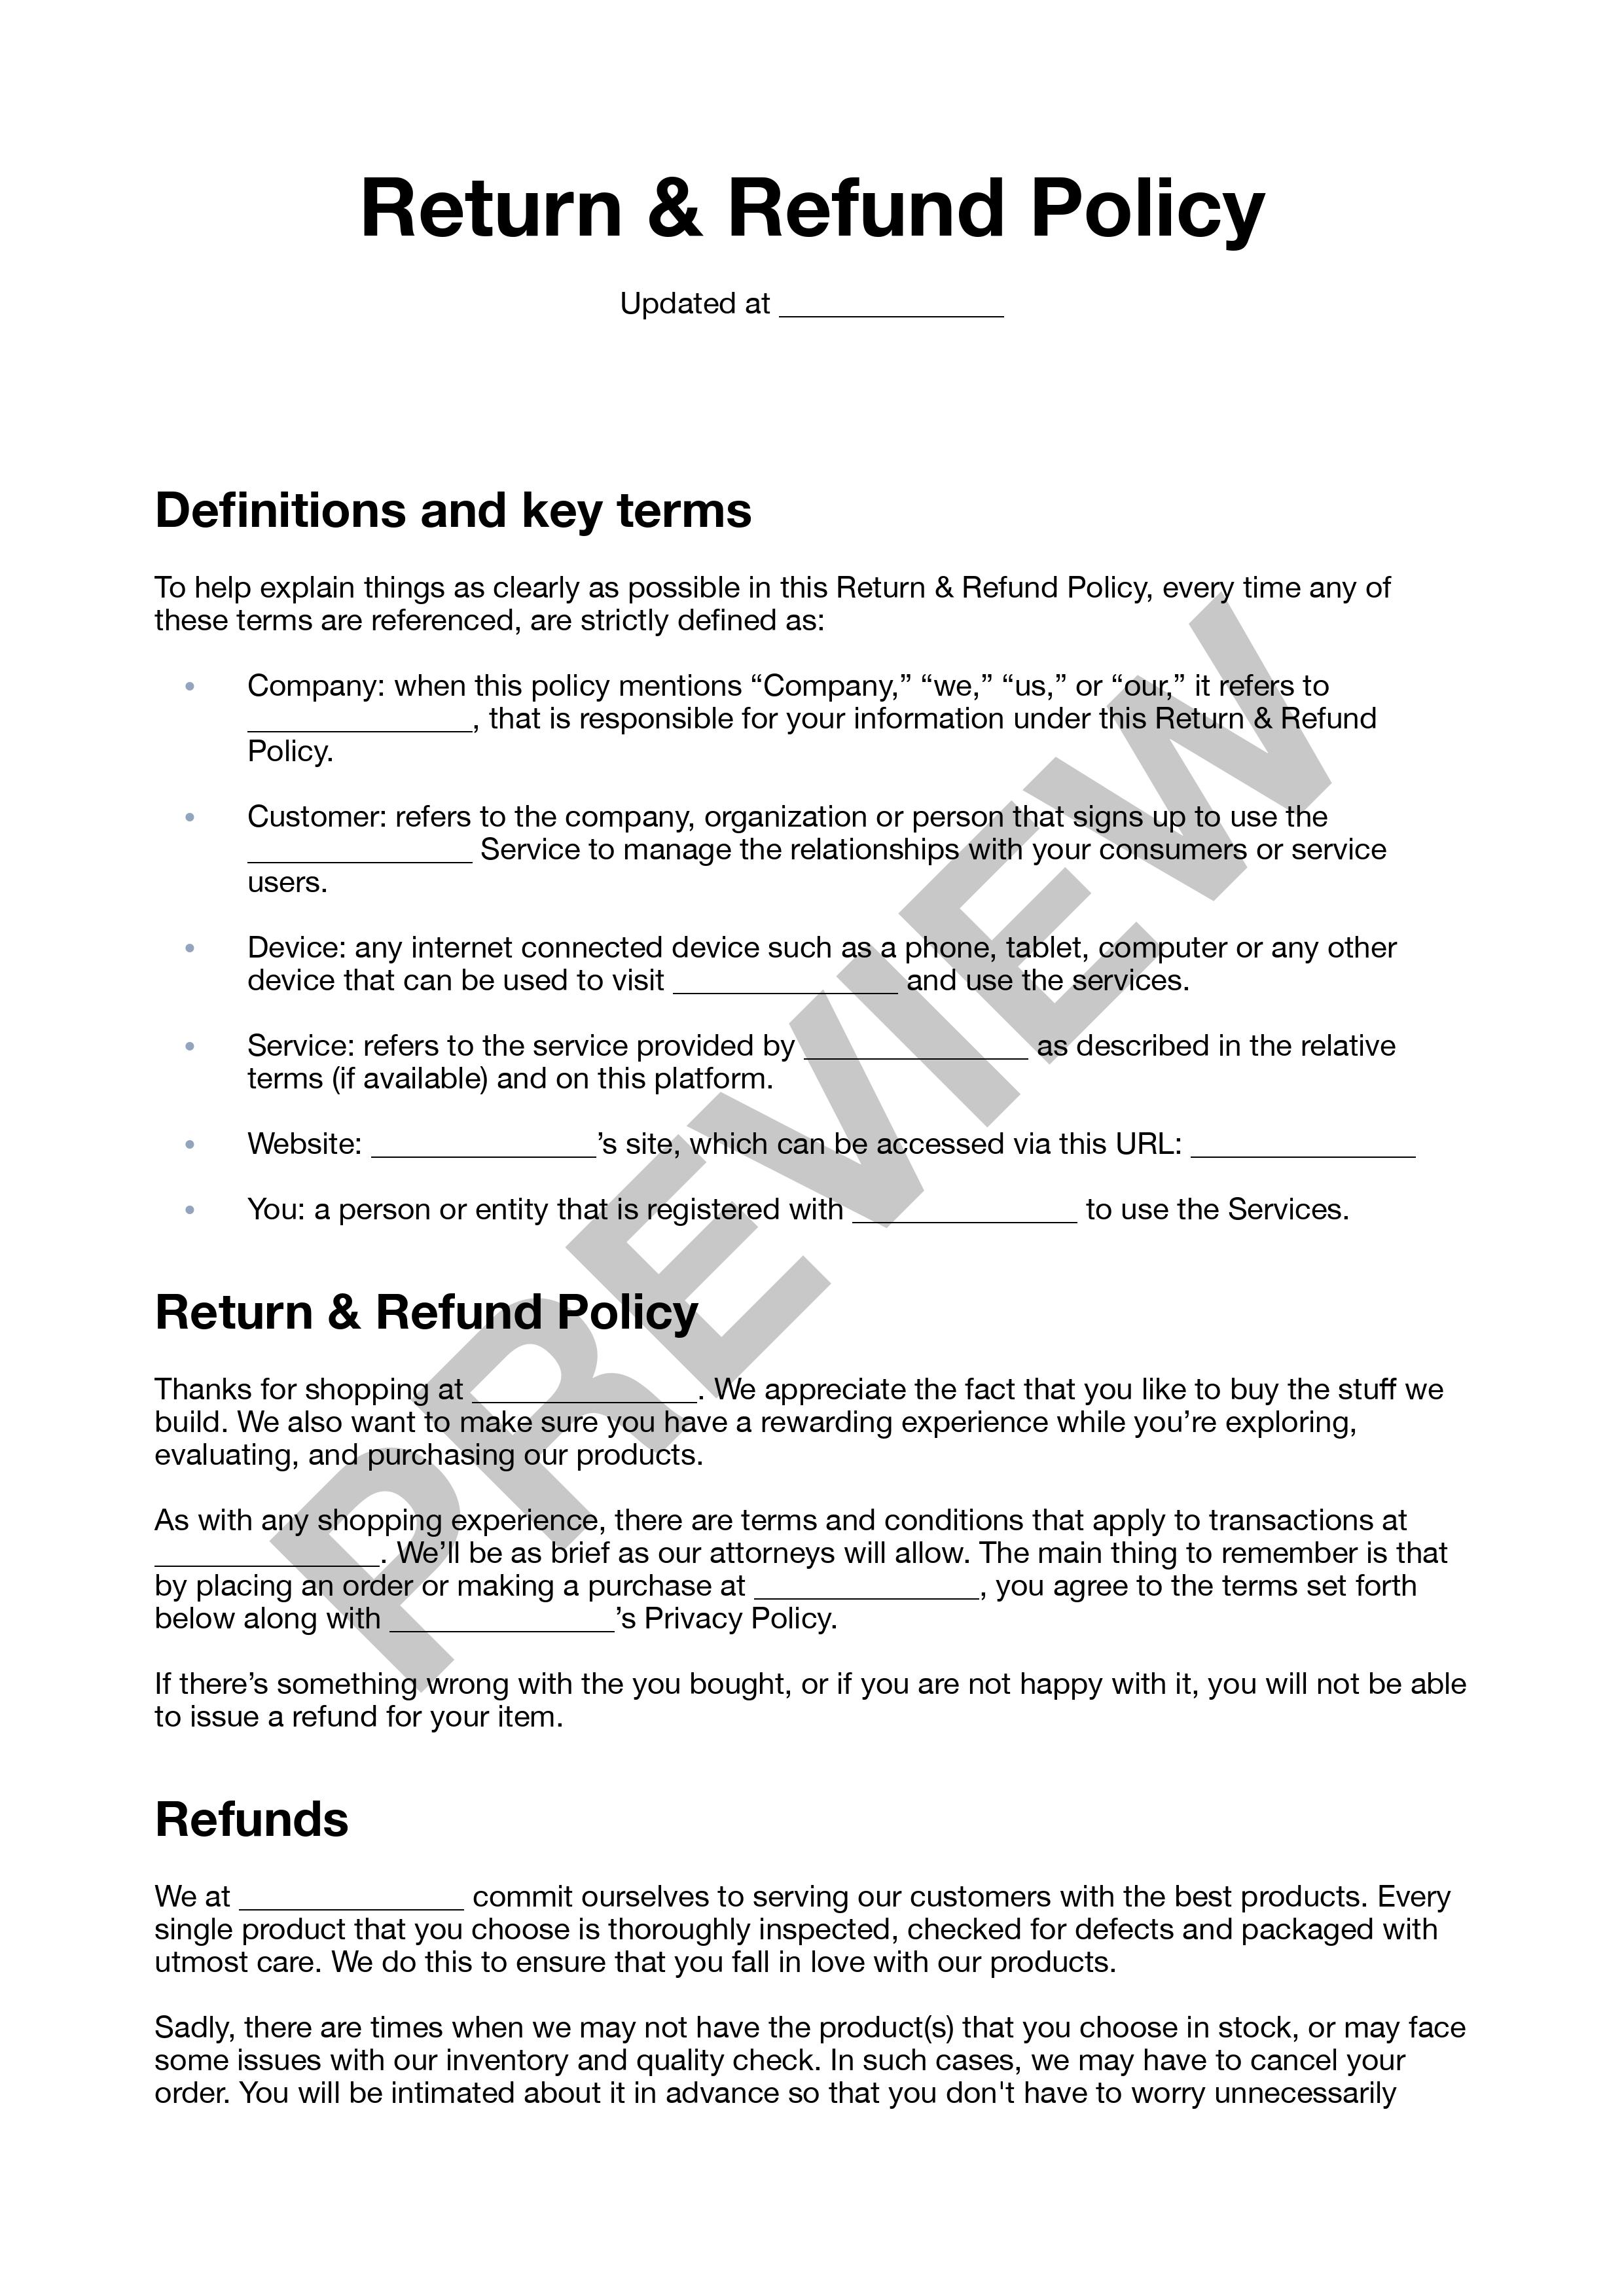 Preview Return & Refund Policies